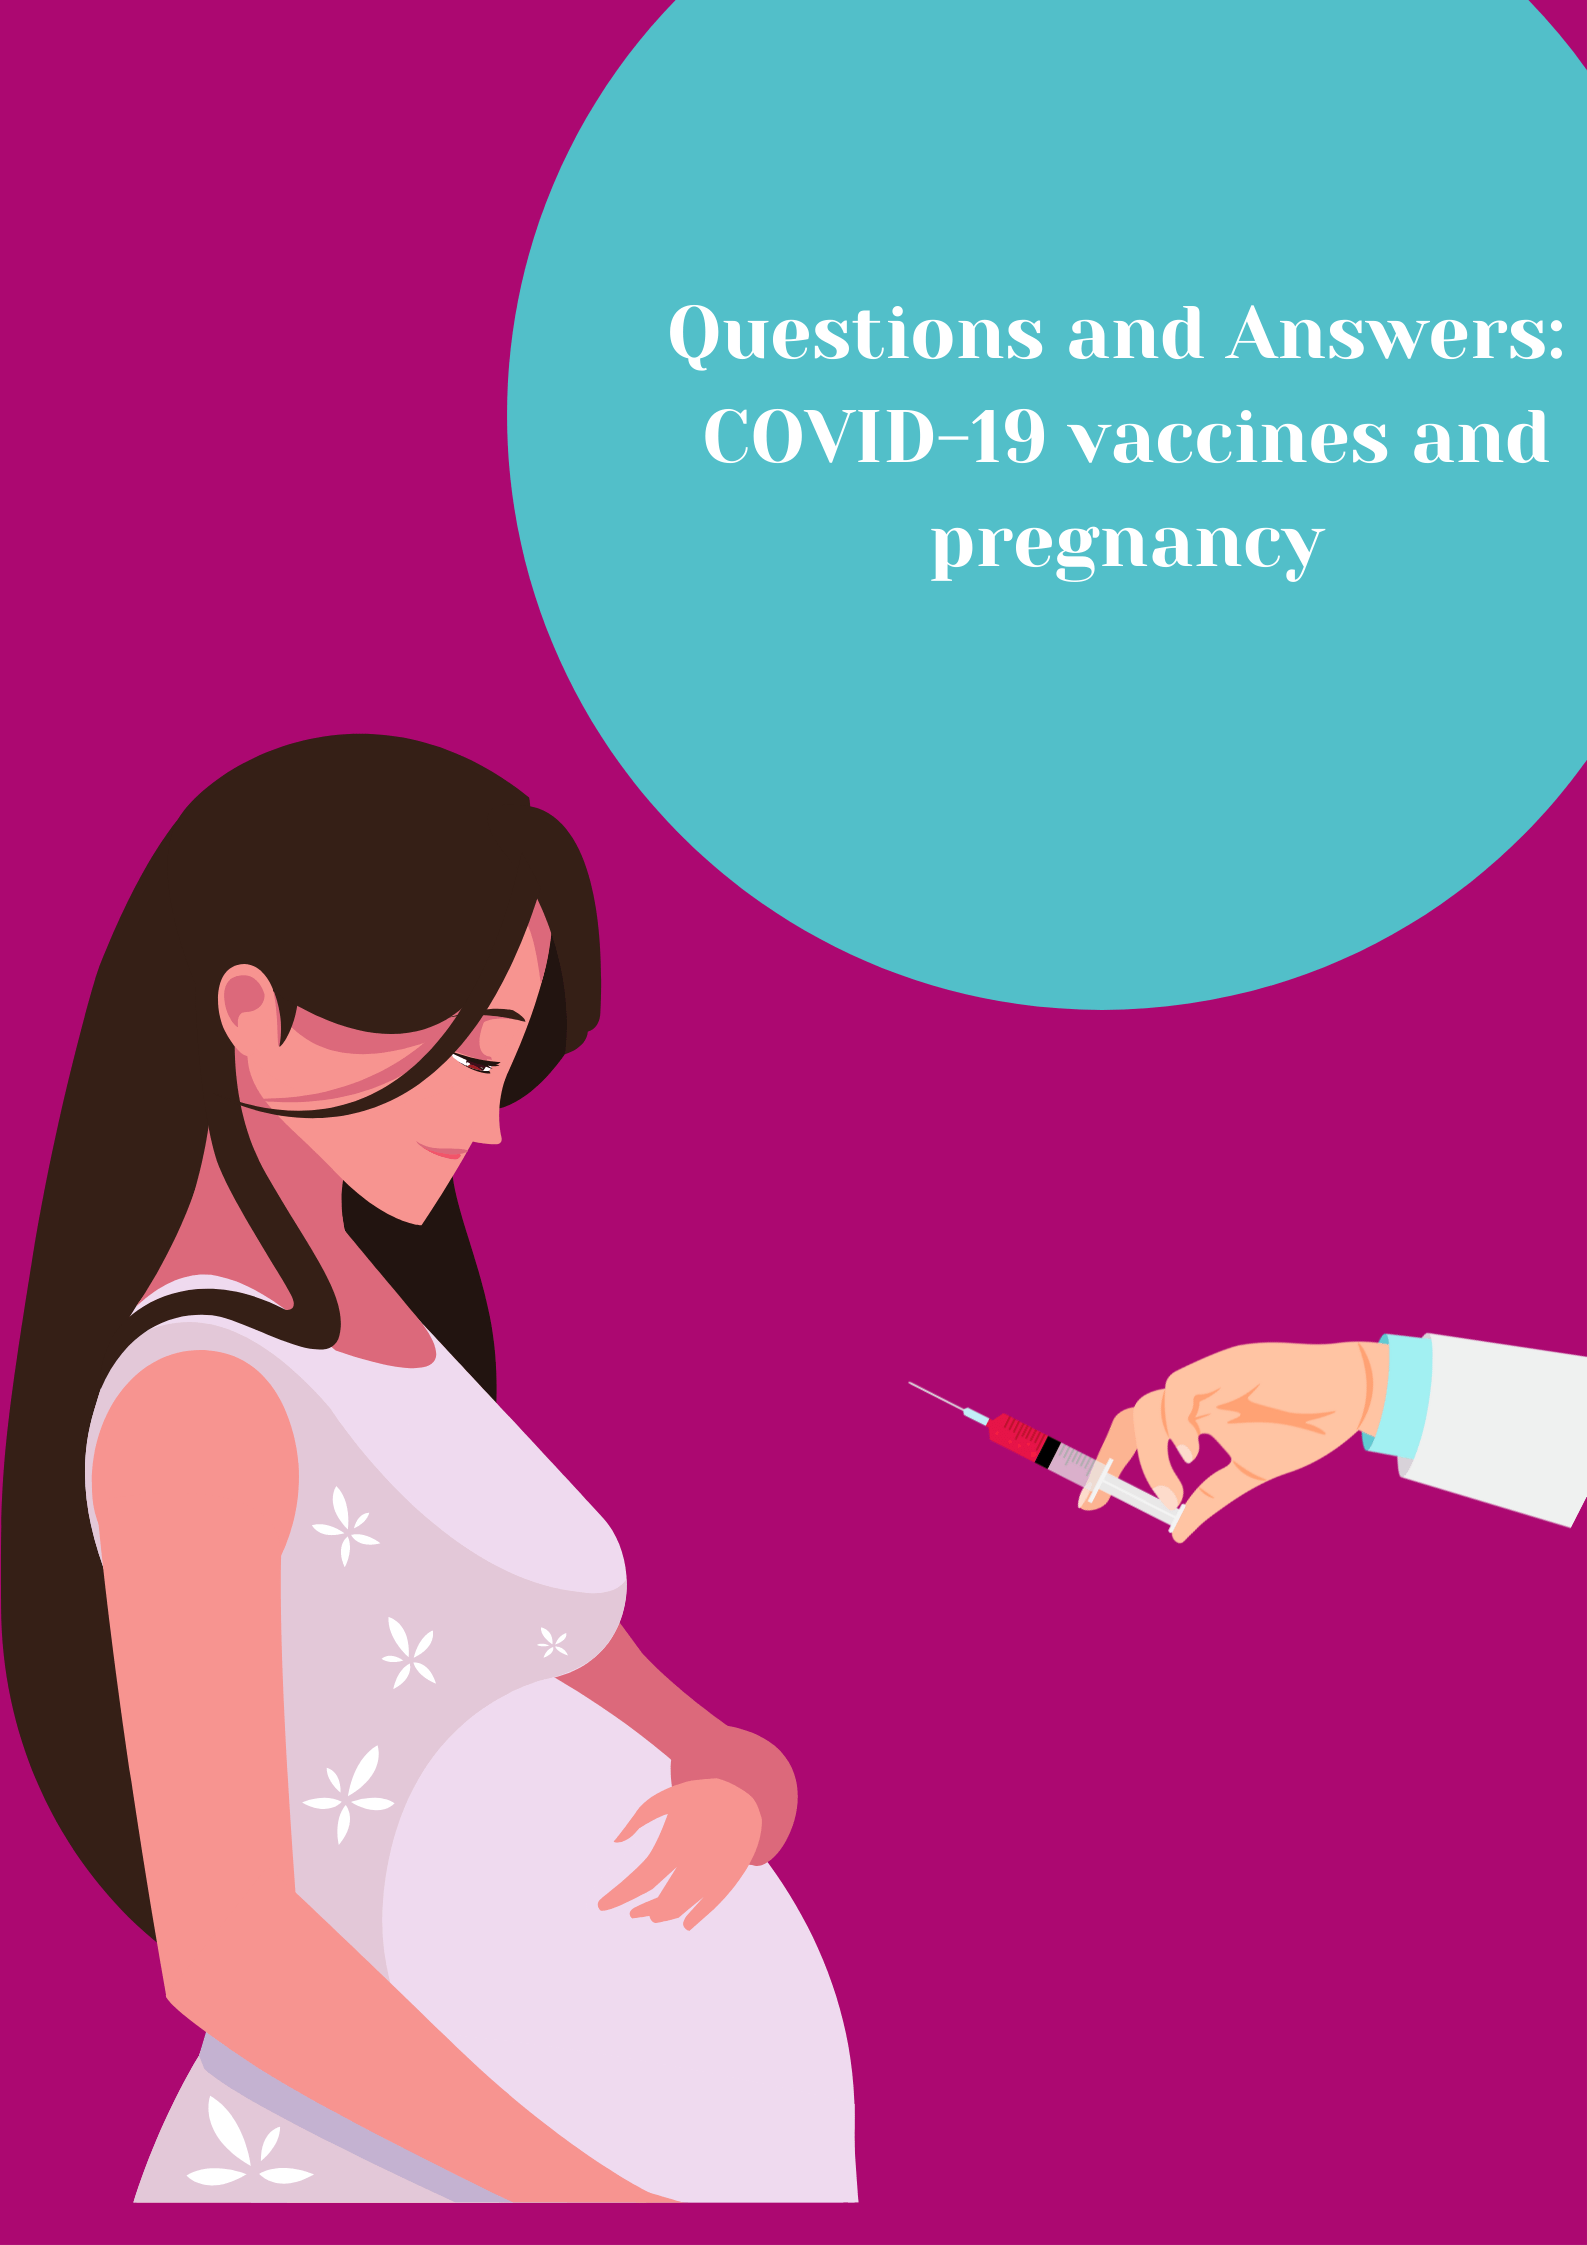 COVID-19 vaccines and pregnancy